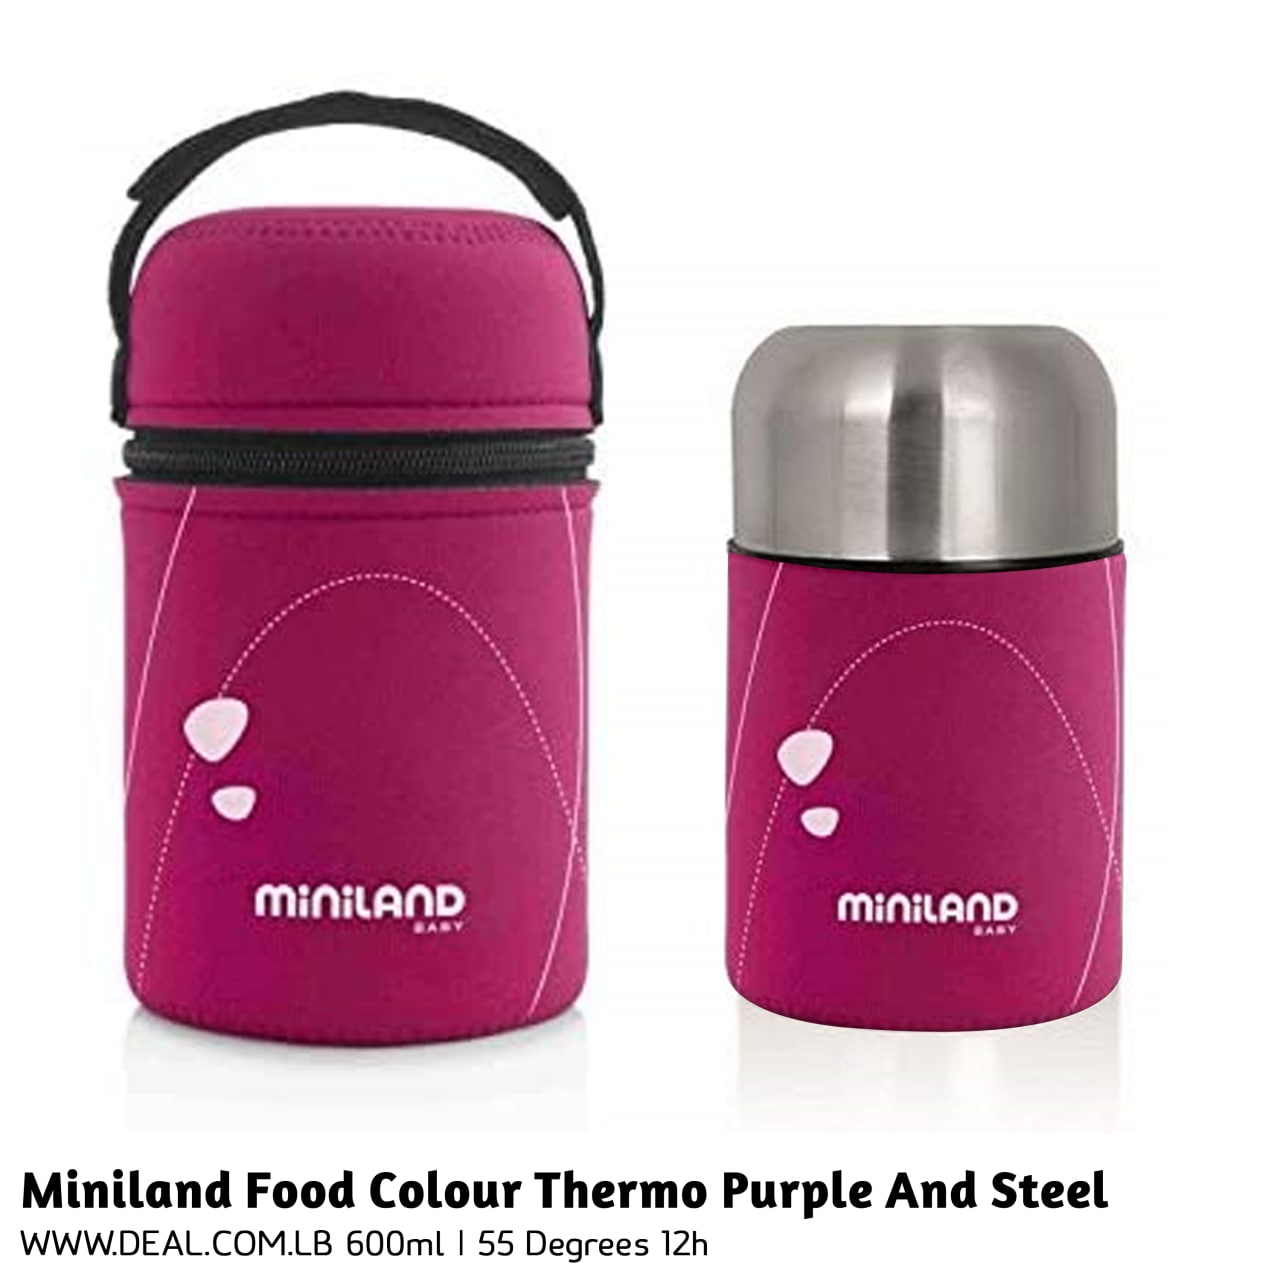 Miniland Food Color Thermo Purple And Steel